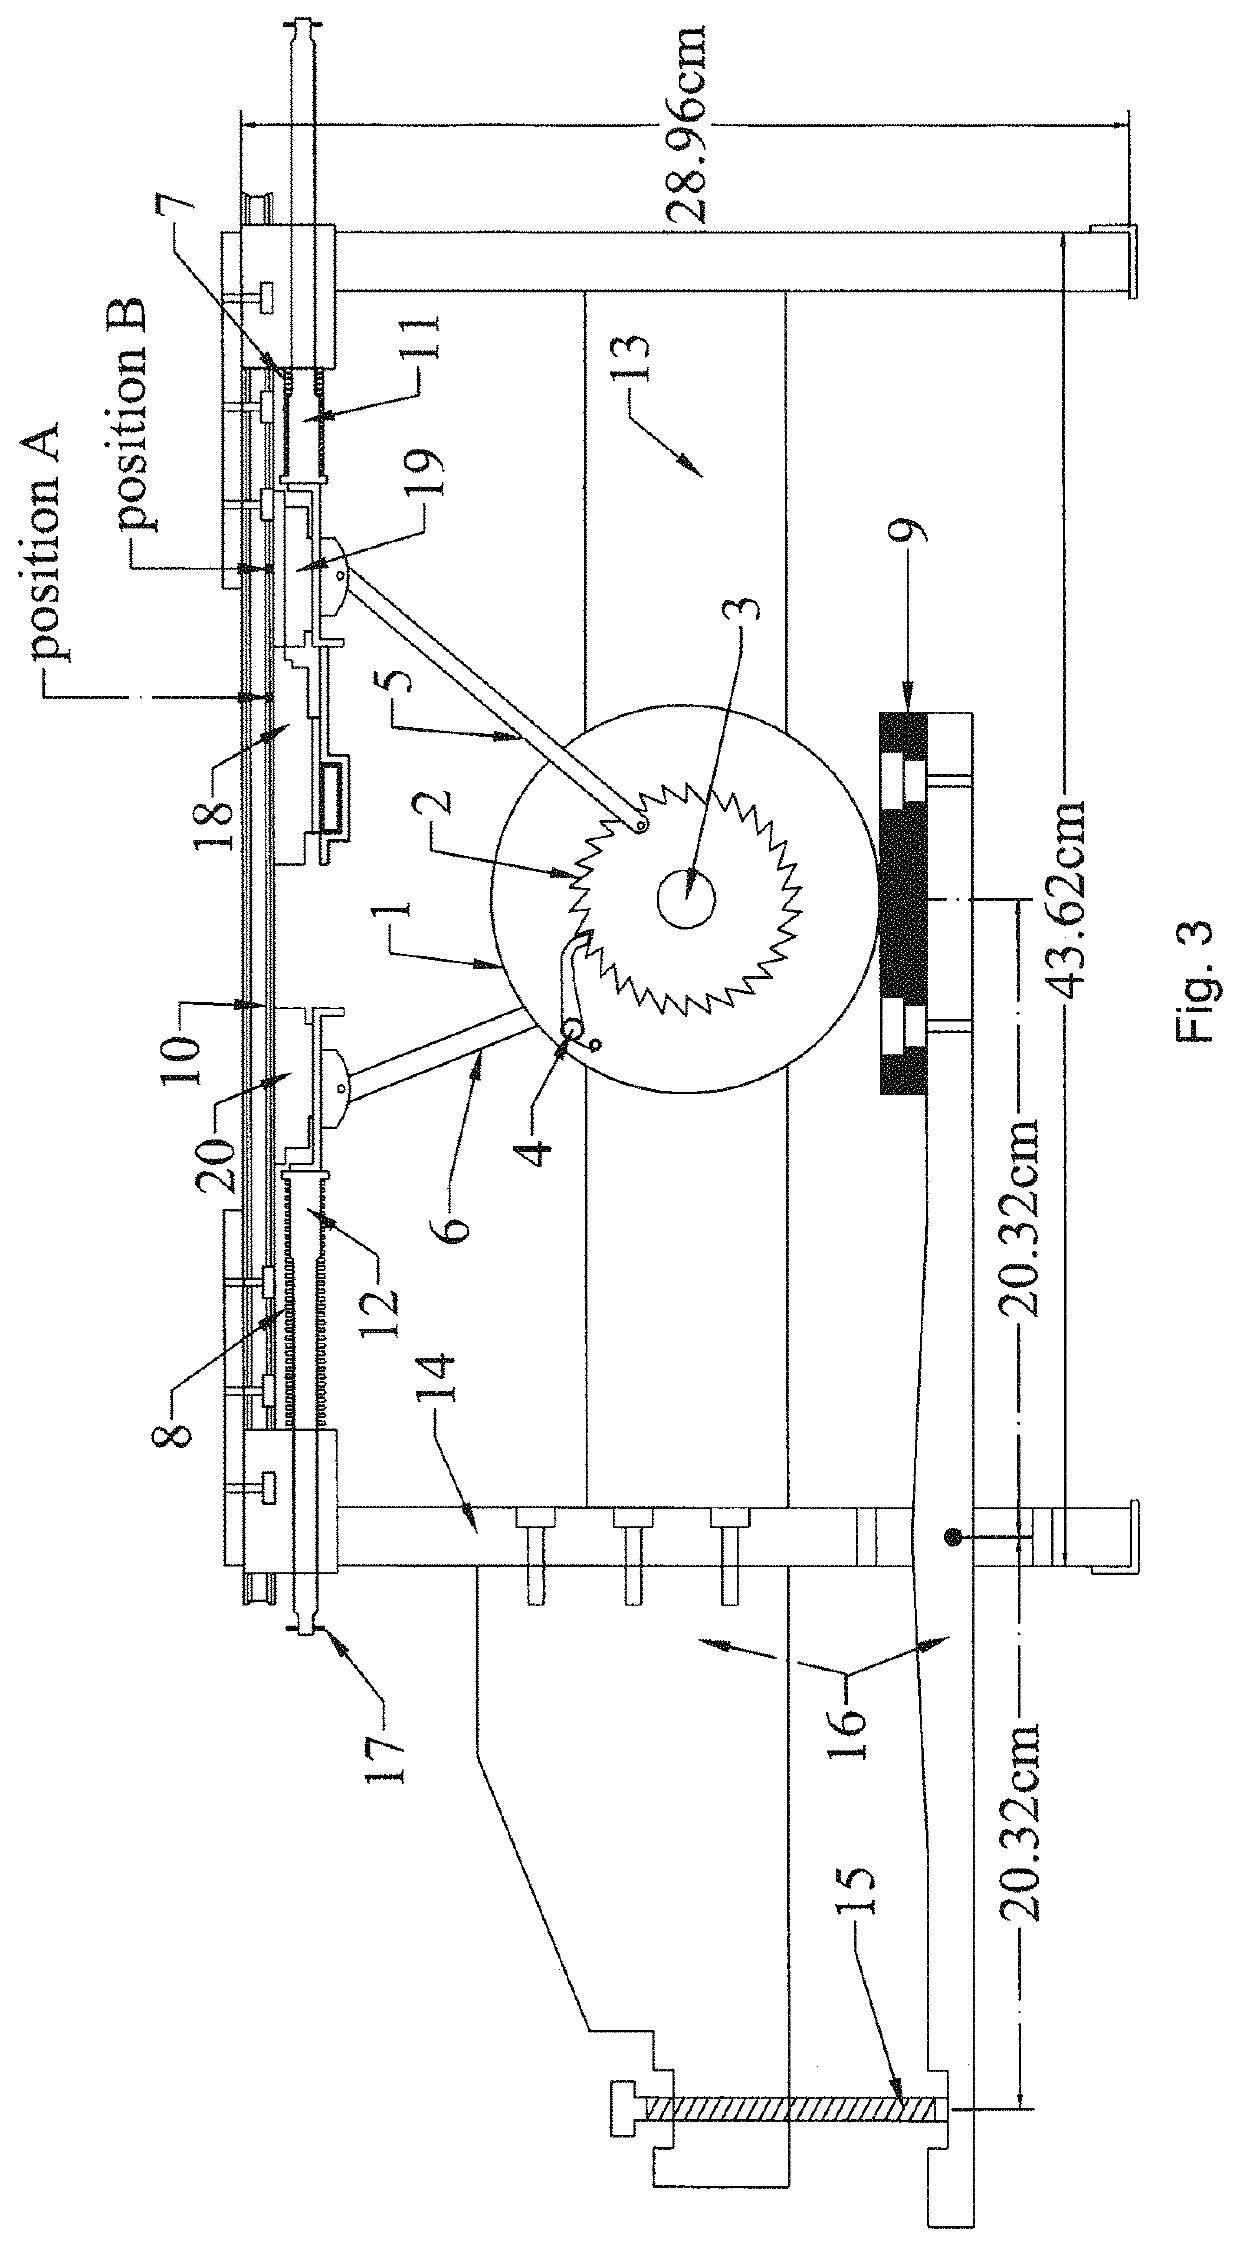 Adaptive self-centering apparatus and method for seismic and wind protection of structures